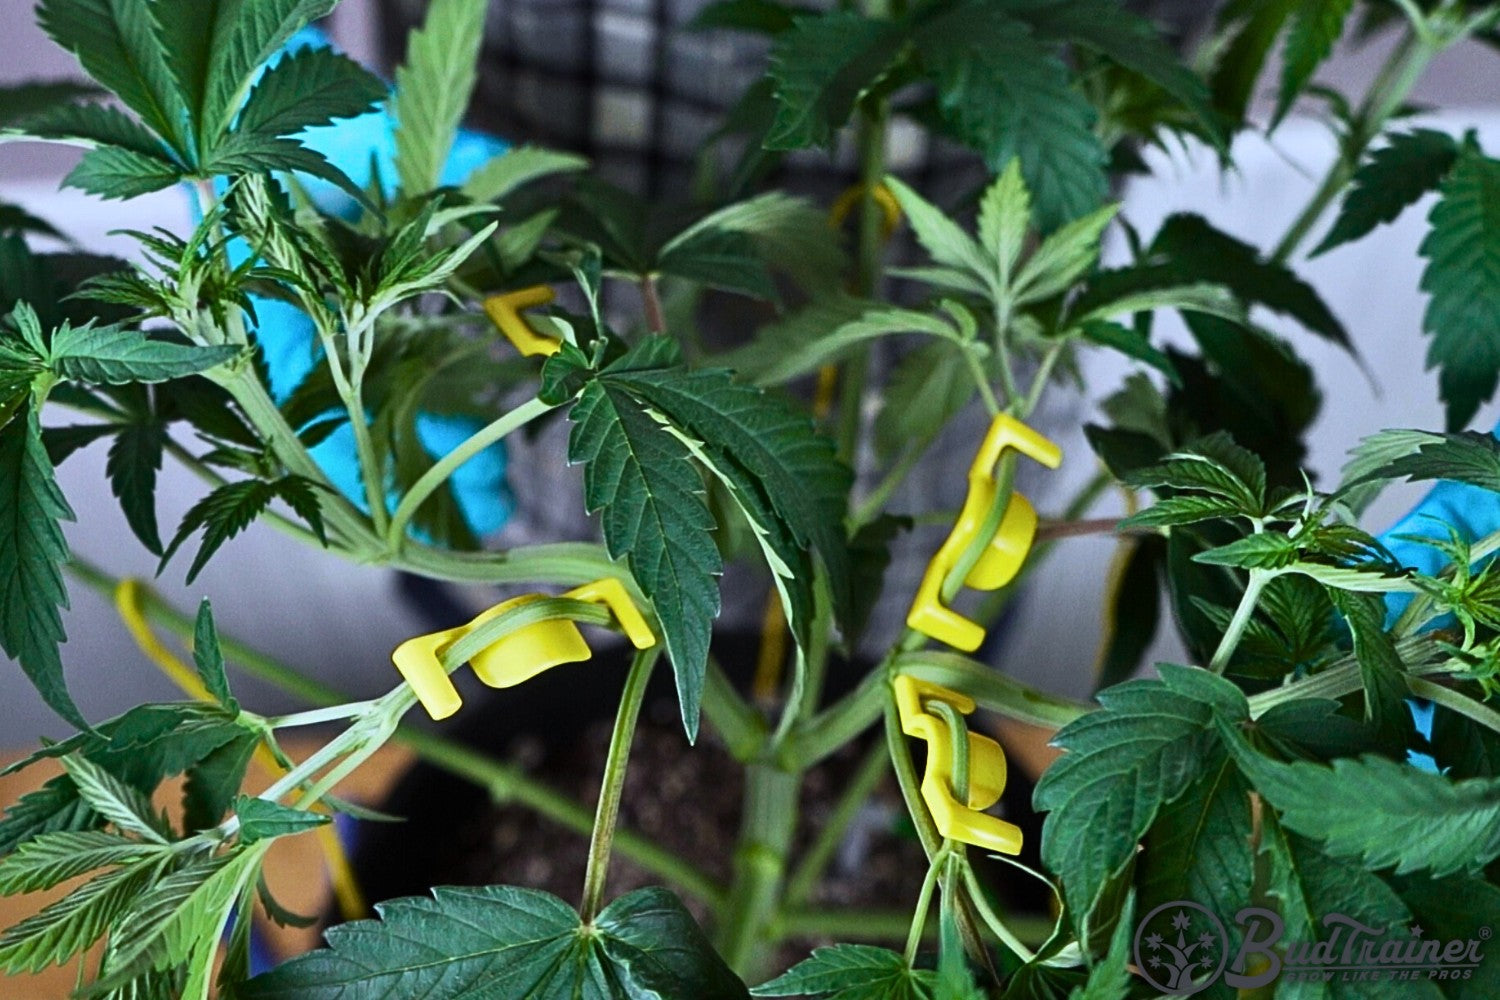 A close-up view of a cannabis plant with several branches secured using yellow BudClips. The branches are being gently trained to grow outward, and the plant’s leaves are green and healthy. The background shows a person wearing blue gloves, indicating they are carefully handling the plant. The training clips are attached to different parts of the branches, guiding their growth direction.